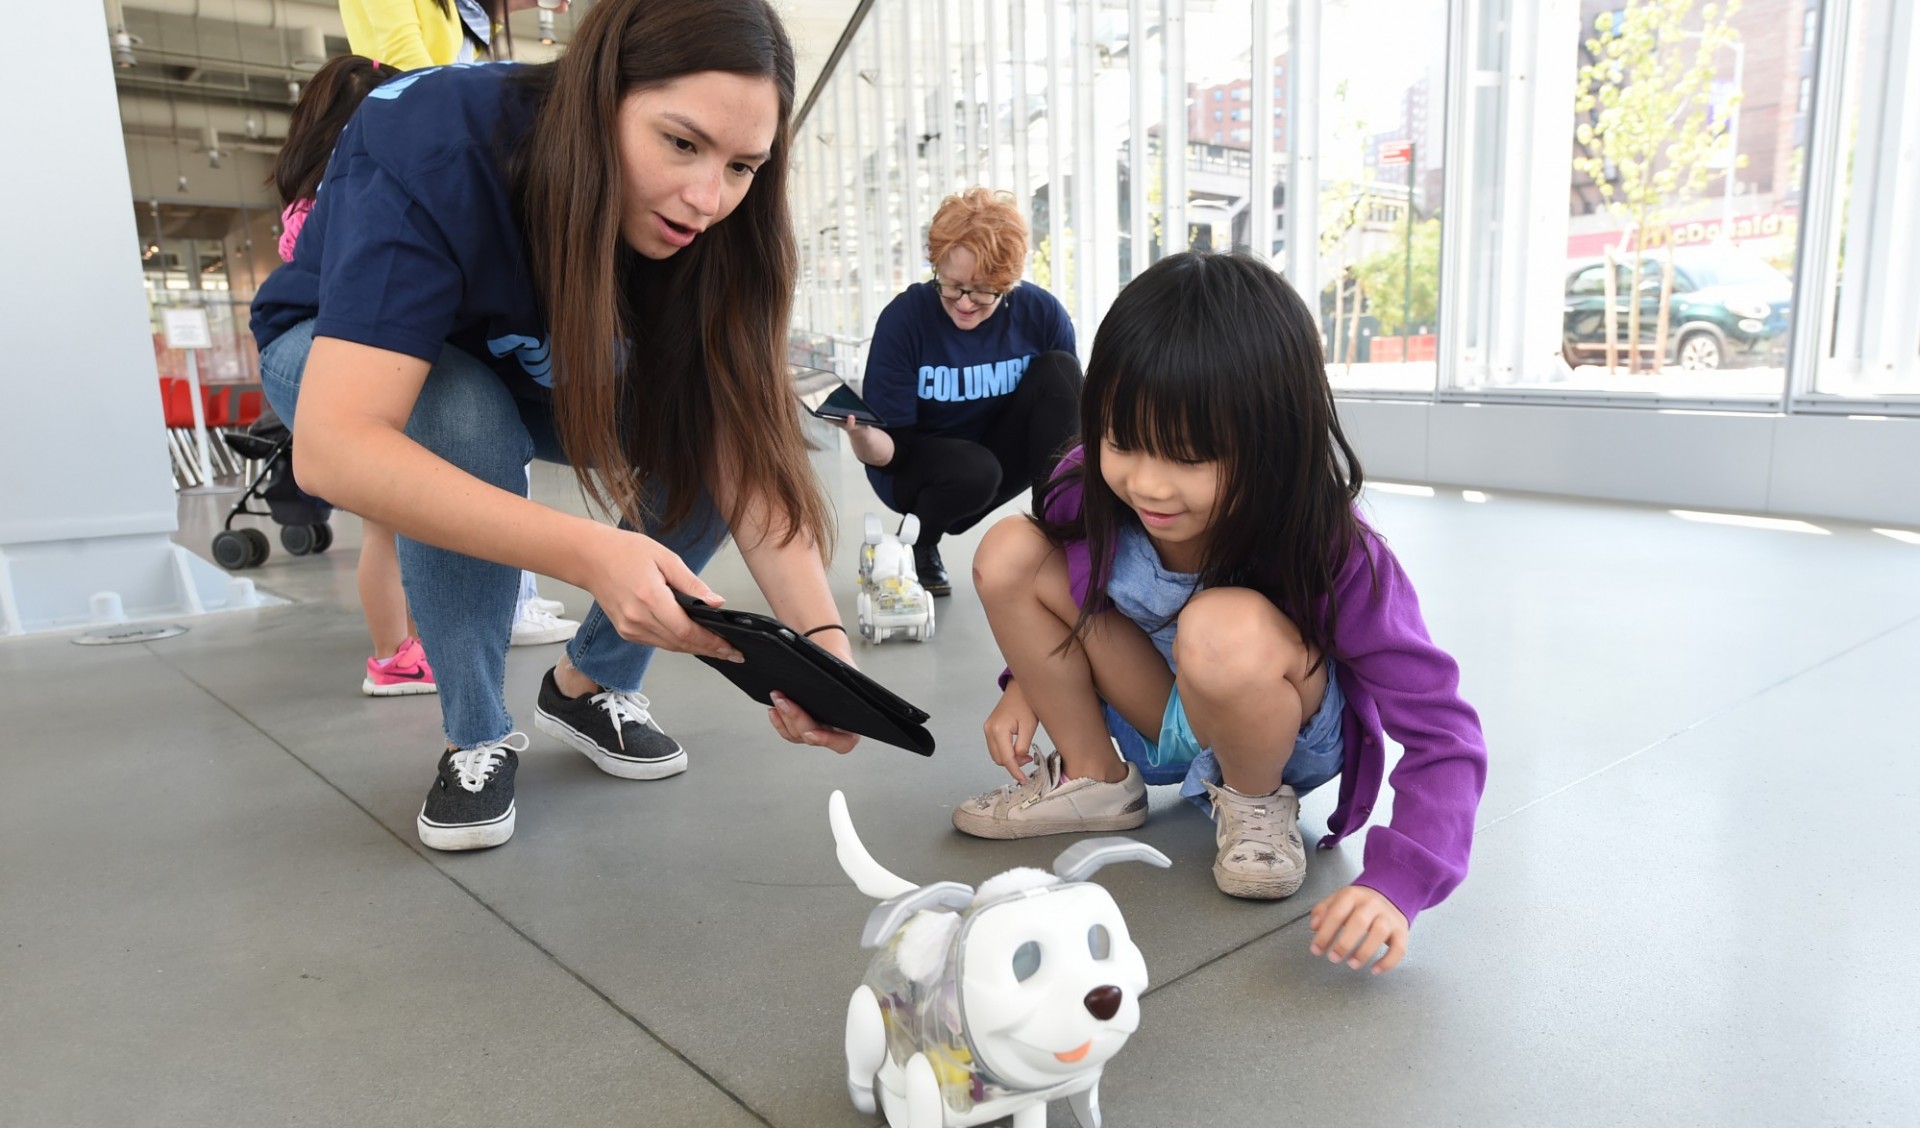 Young woman demonstrates how to control a robotic dog using an iPad while a young child looks on